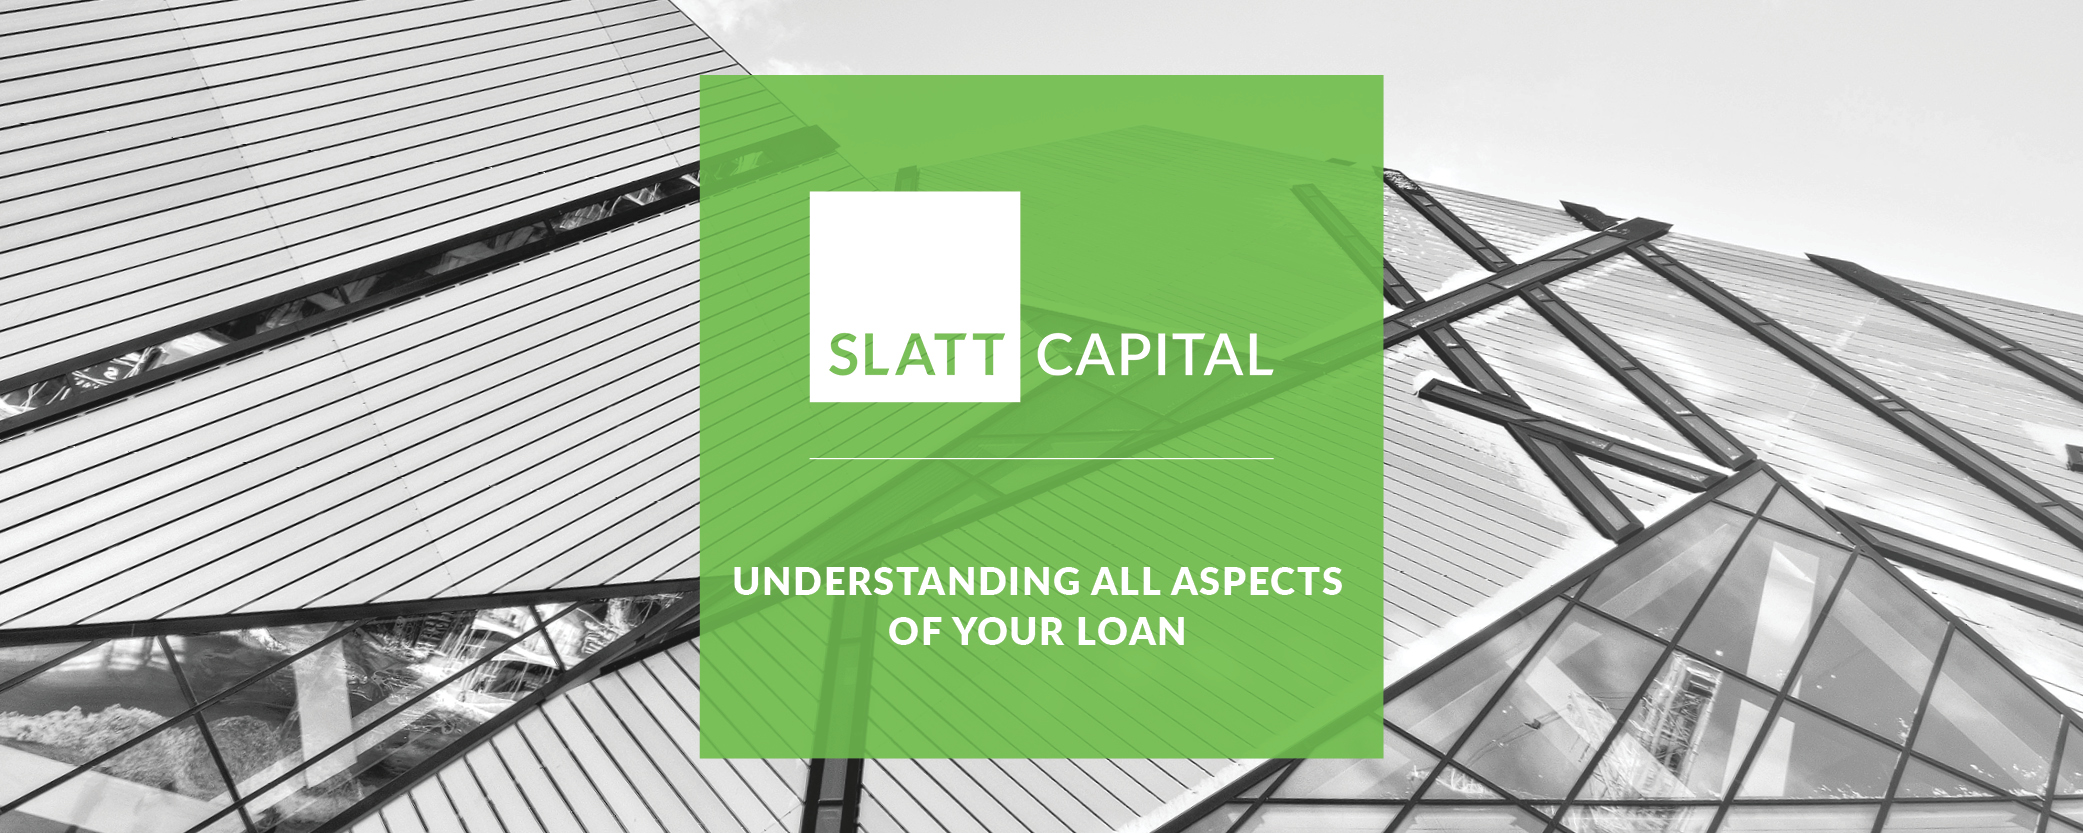 Understanding all aspects of your loan